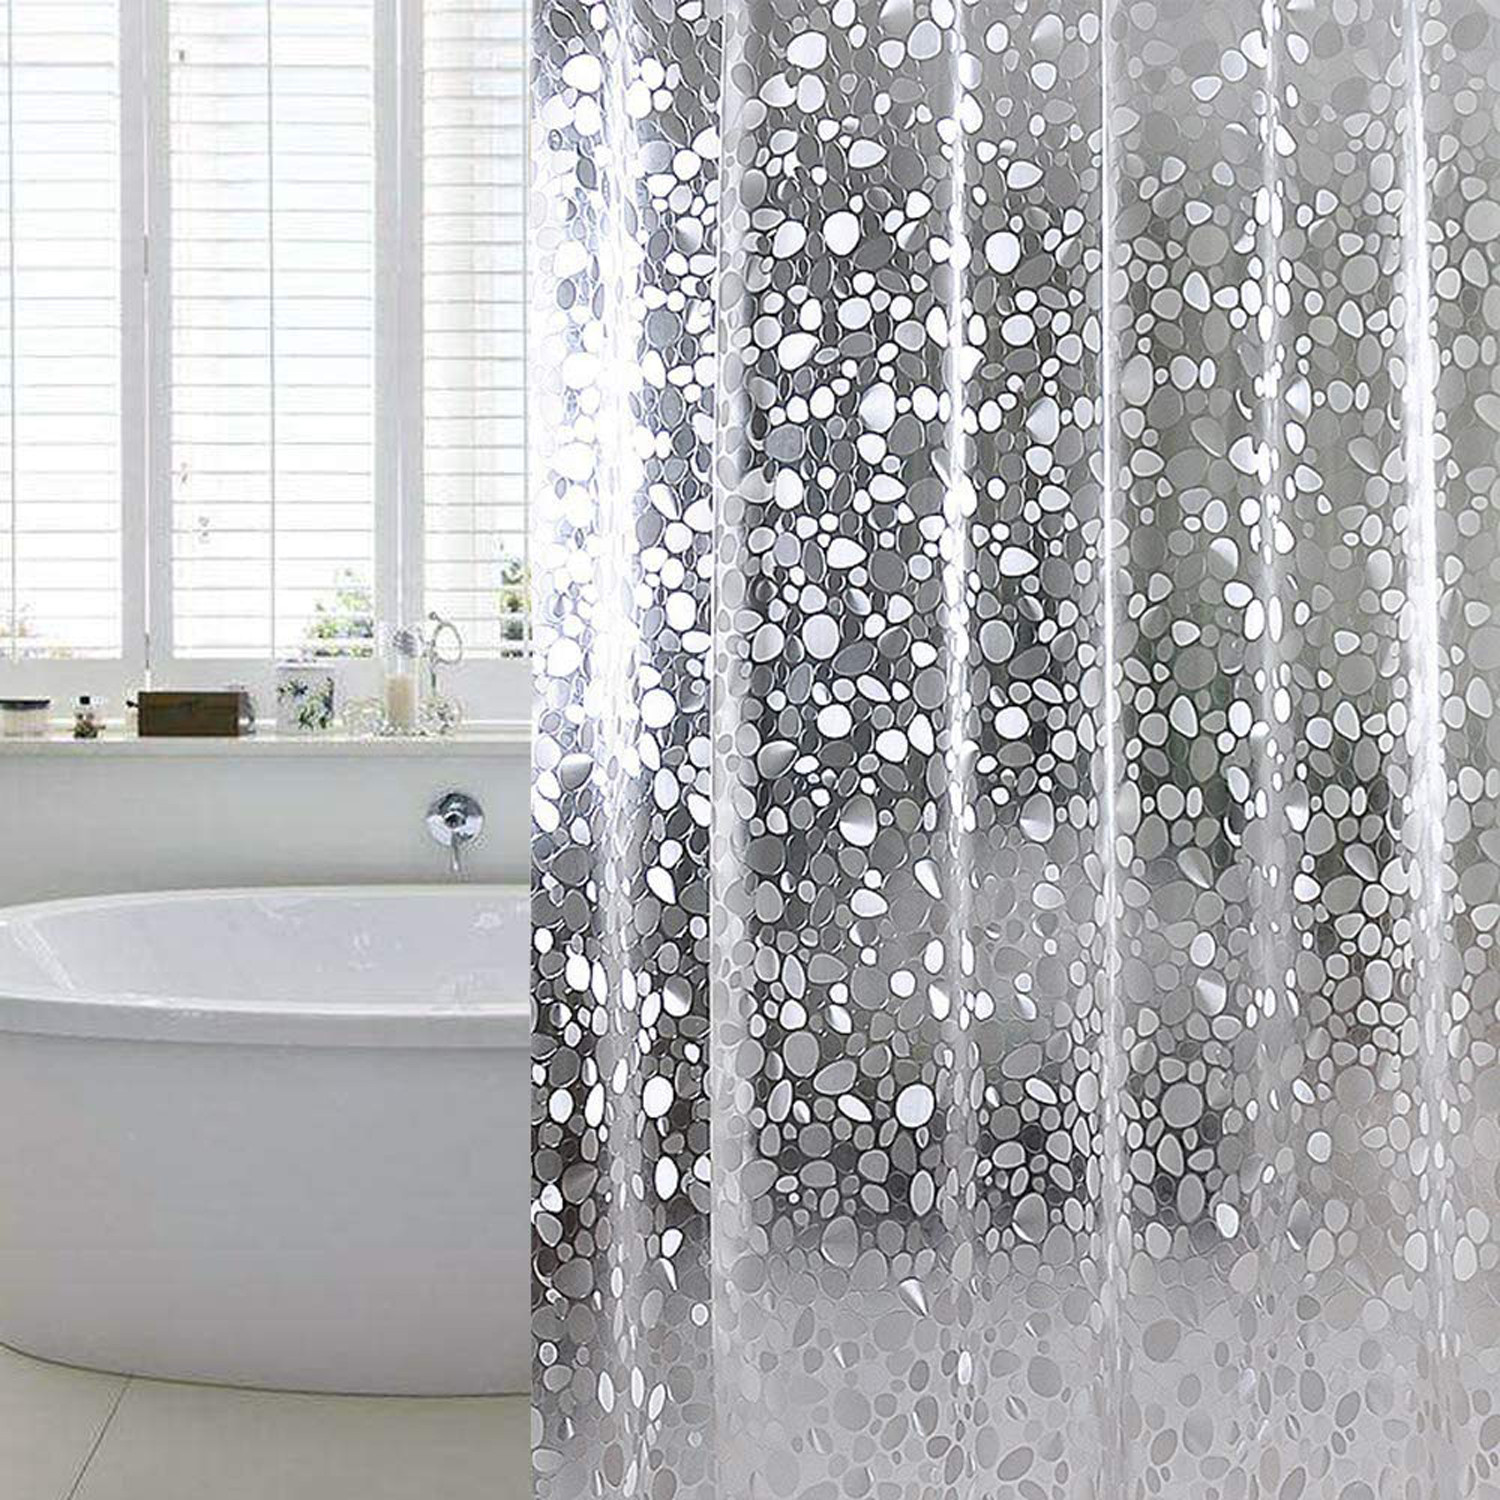 Kuber Industries 0.20mm 3D Stain Resistant, No Odor Clear Waterproof PVC AC Shower Curtain With Eyelets,9 Feet (Transparent)-HS_38_KUBMART21309